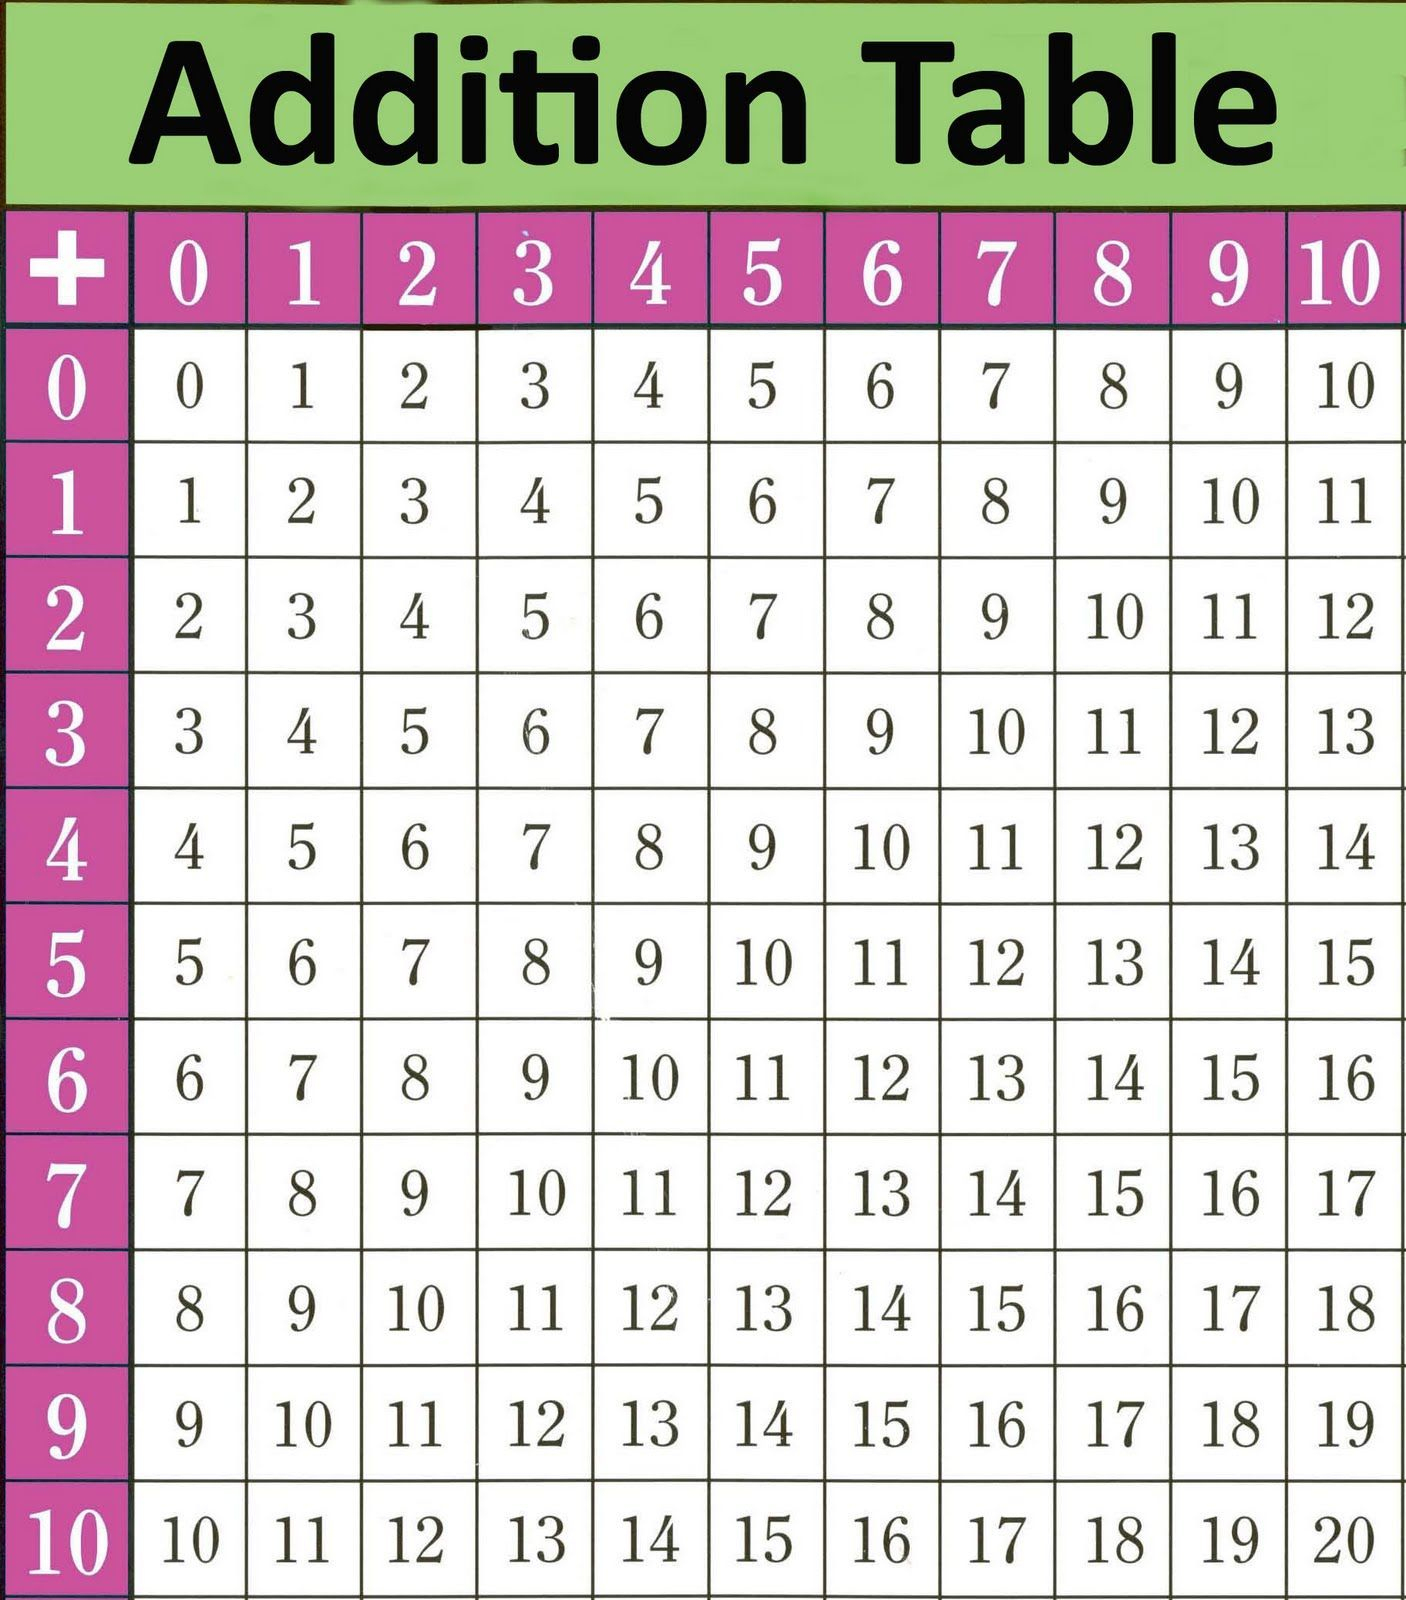 Image Result For Addition Table 1 To 12 | Addition Table | Pinterest - Free Printable Addition Chart